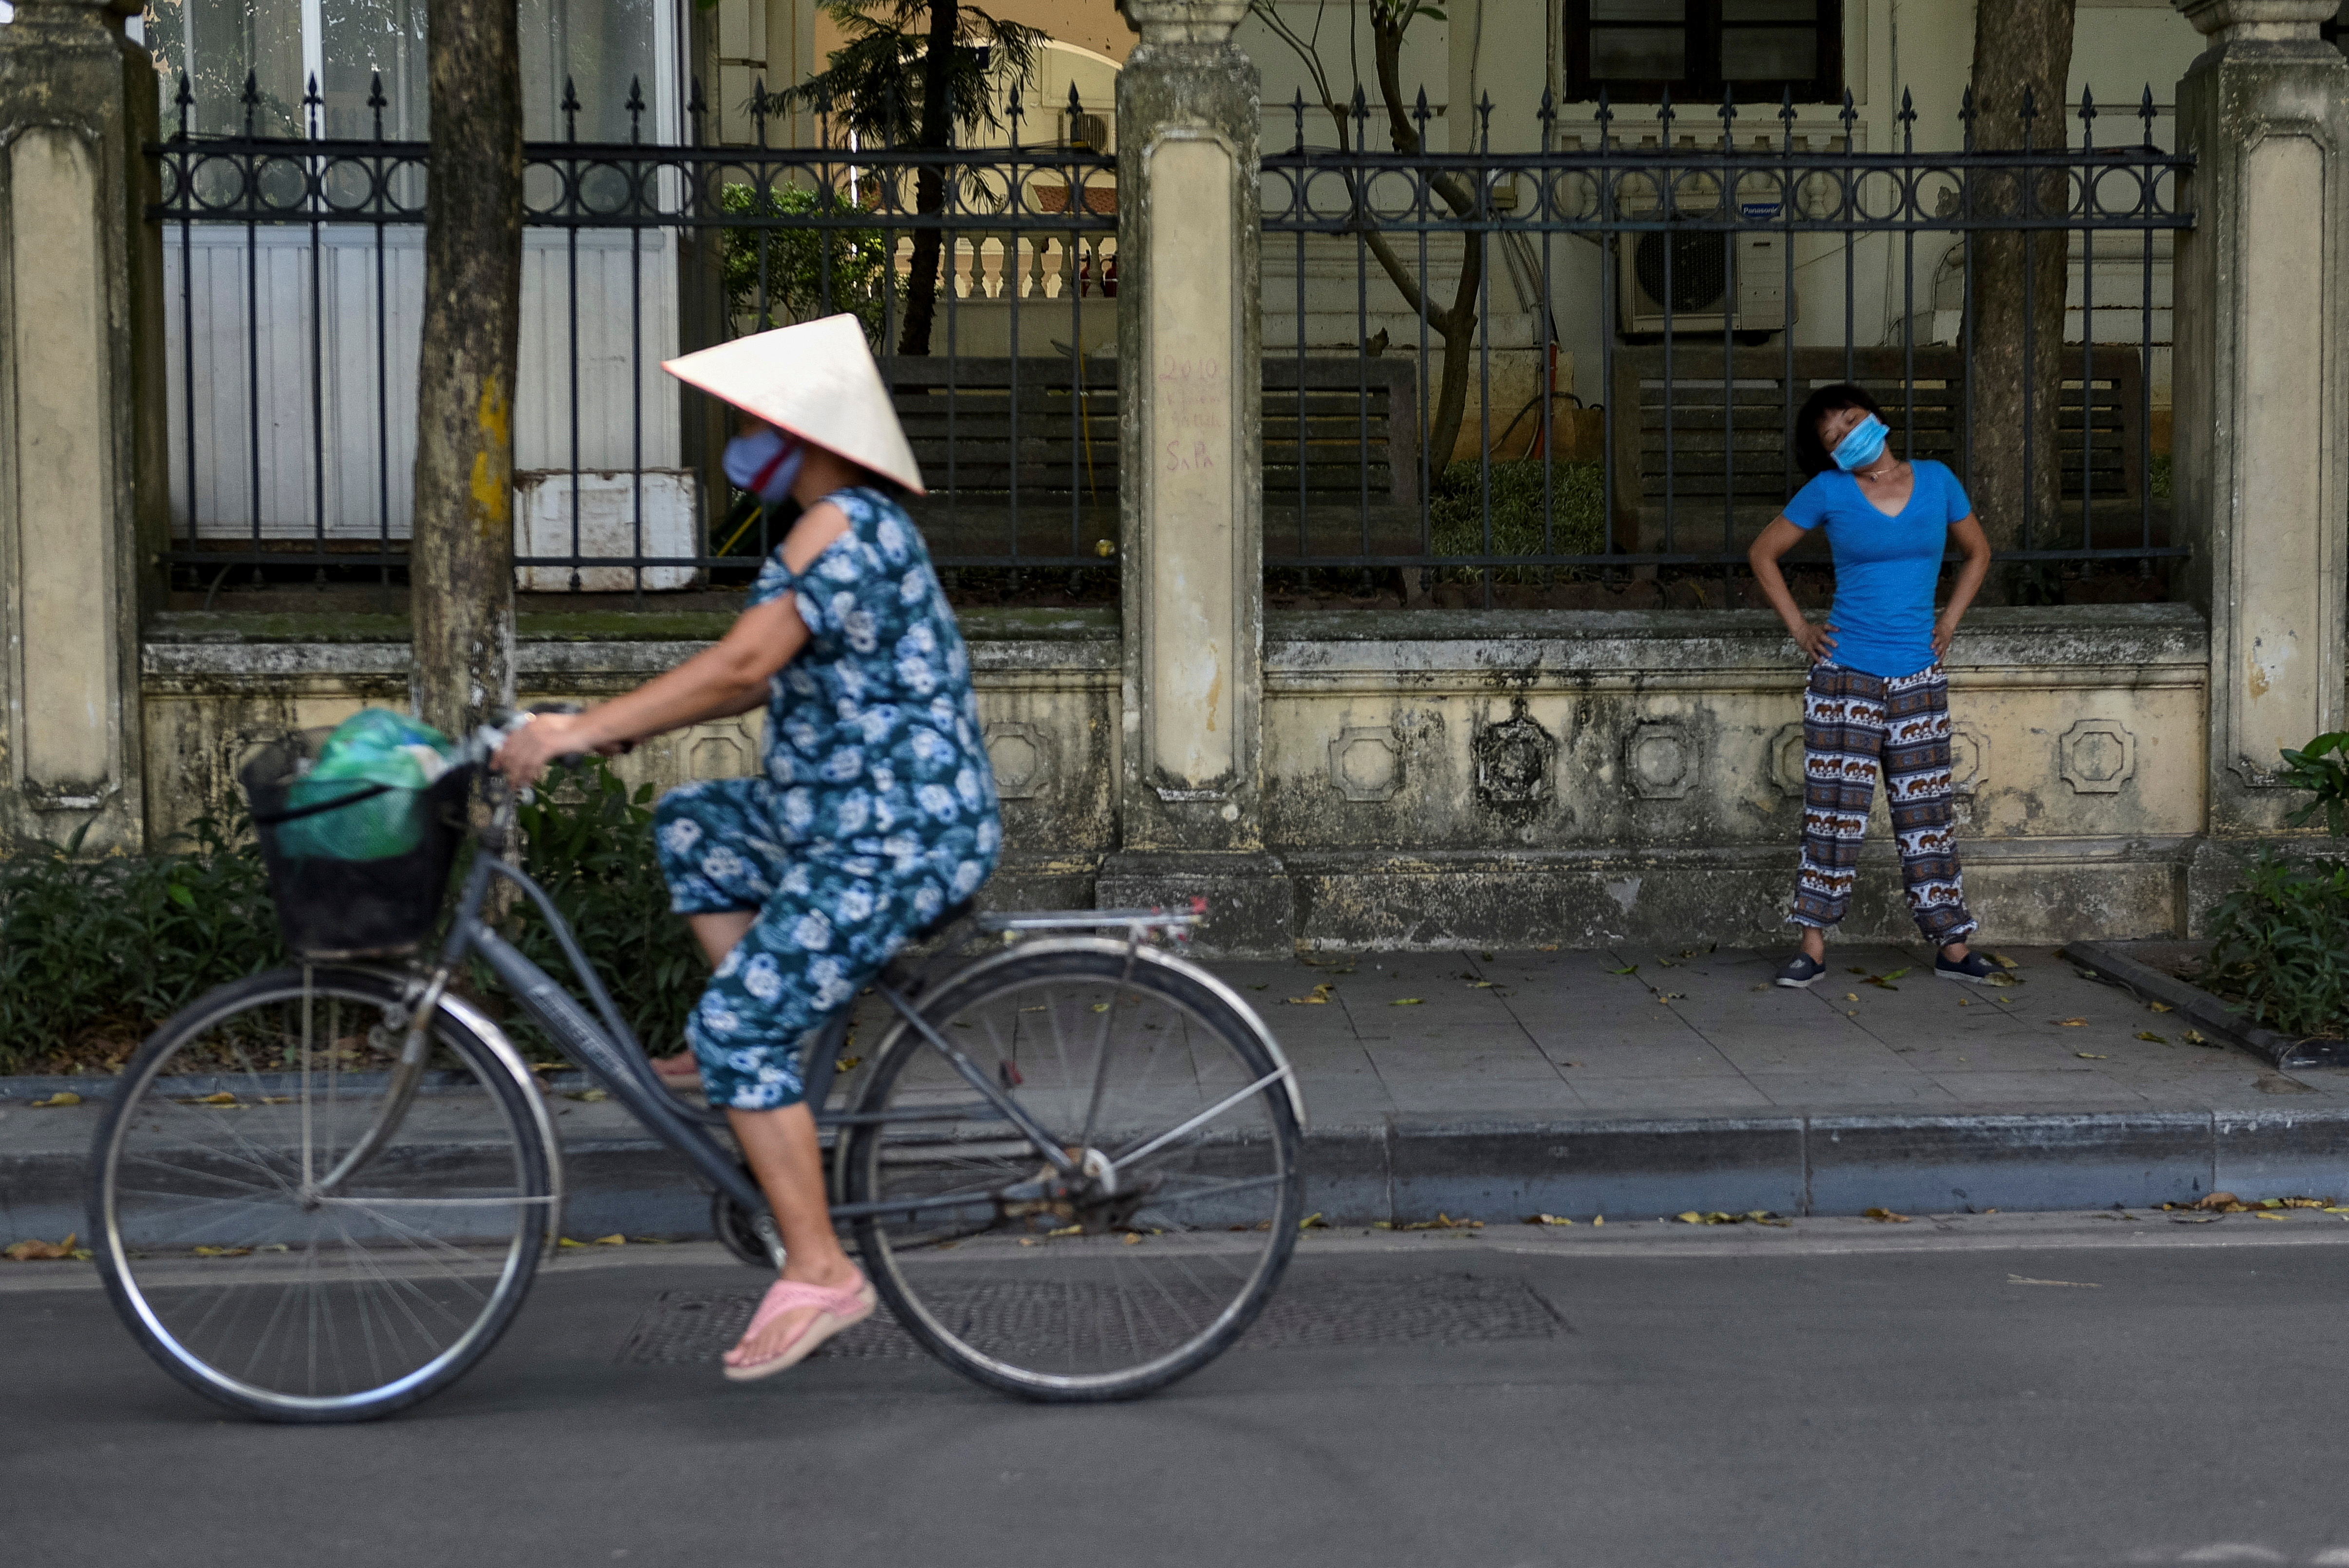 A woman wears a protective mask as she exercises on the street amid COVID-19 pandemic, in Hanoi